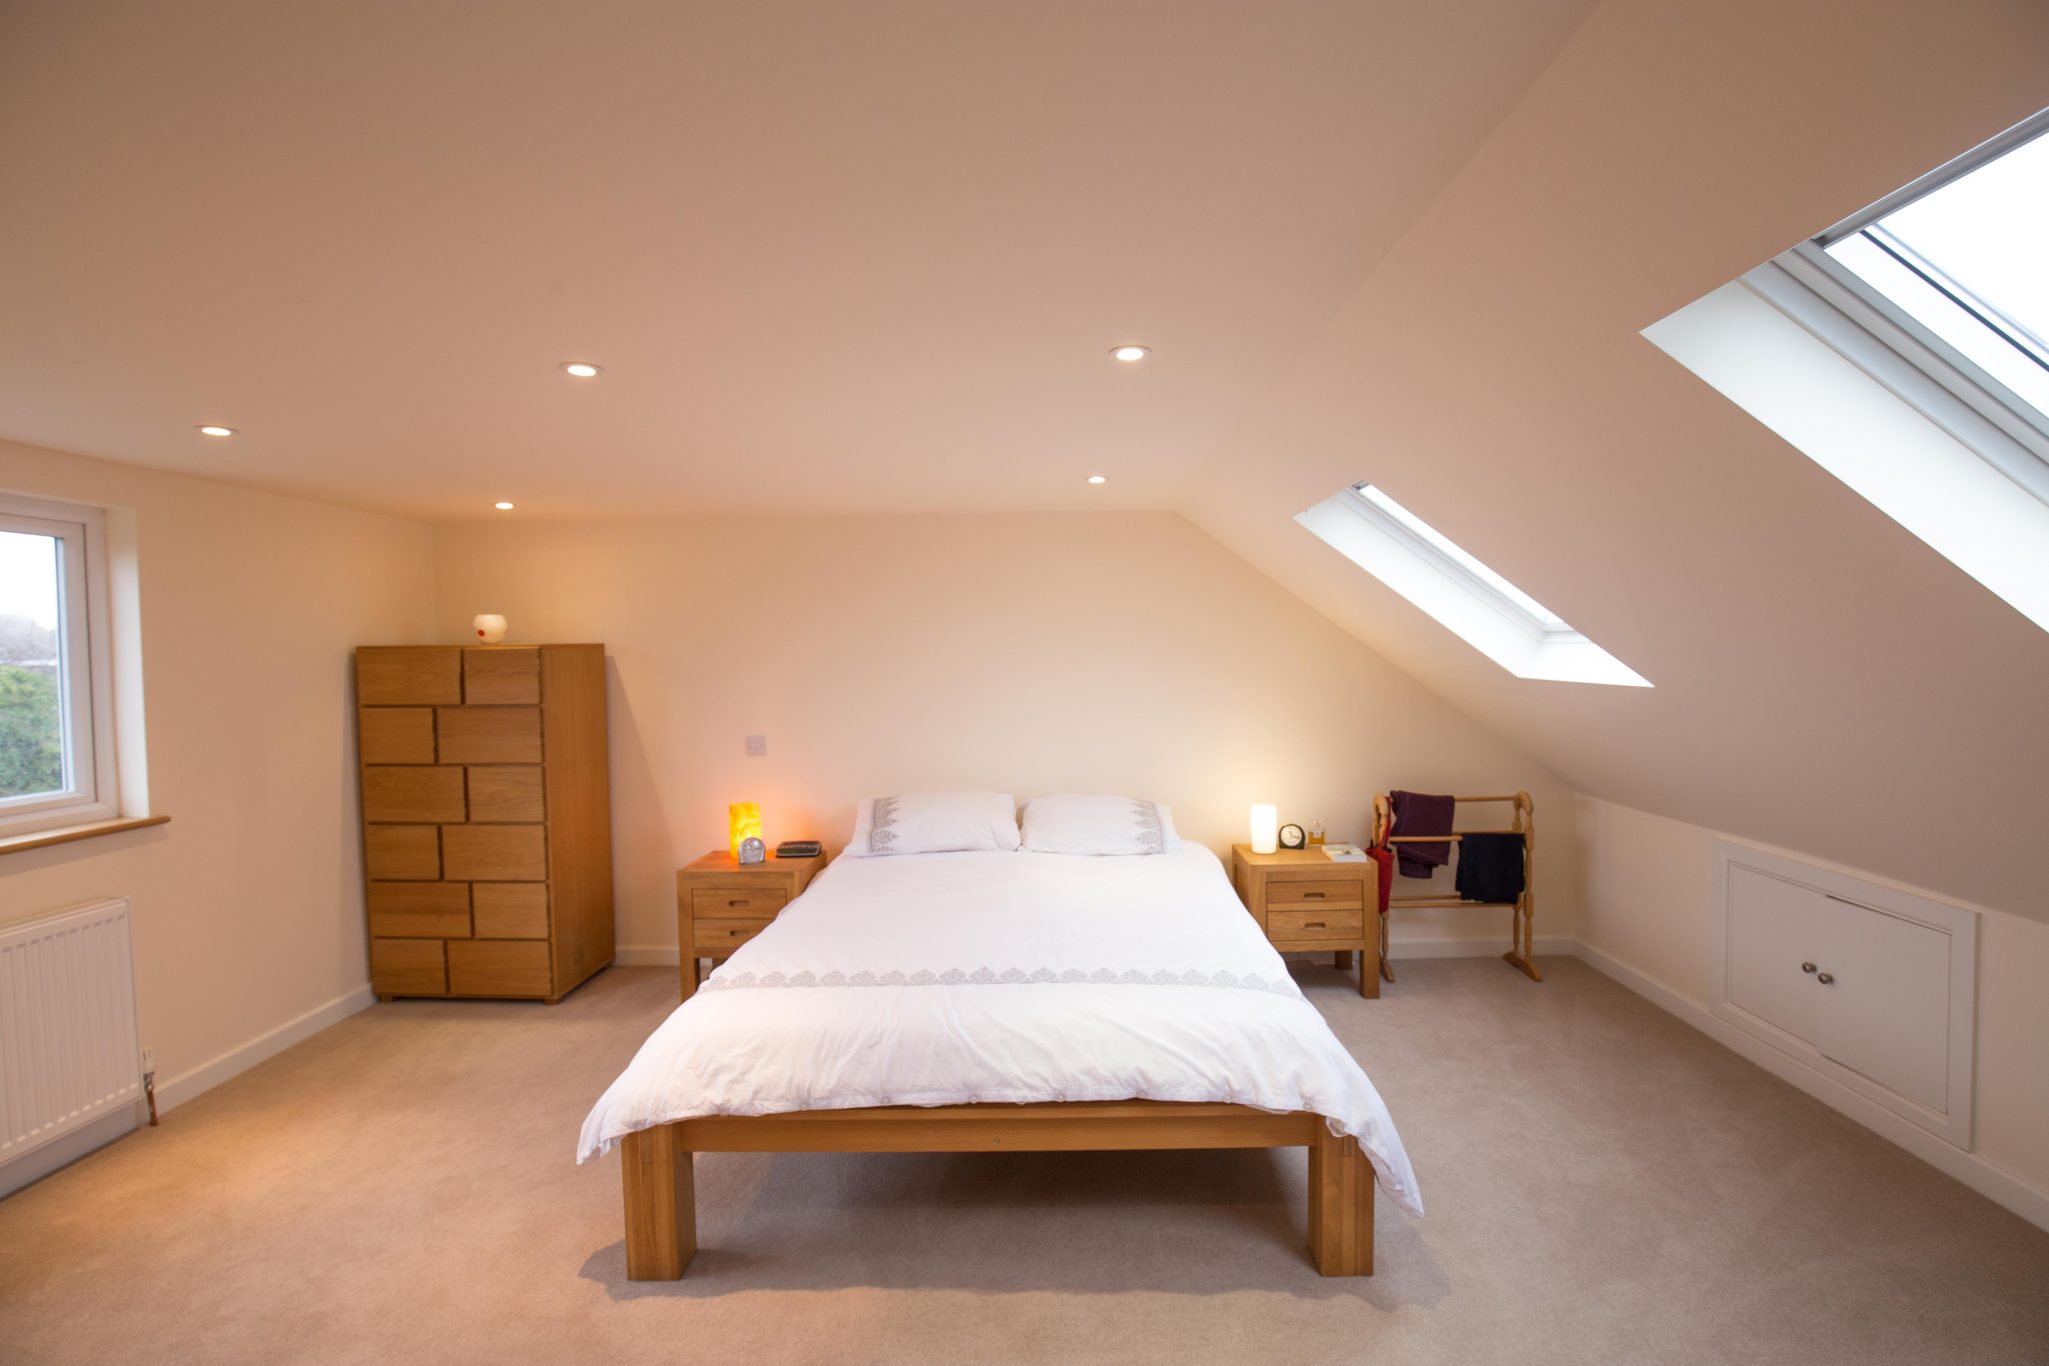 Garage & Loft Conversion
Our clients were hoping to maximise their work / life balance within their home whilst retaining their eclectic tastes and personalities in this streamlined & sophisticated conversion.

The…